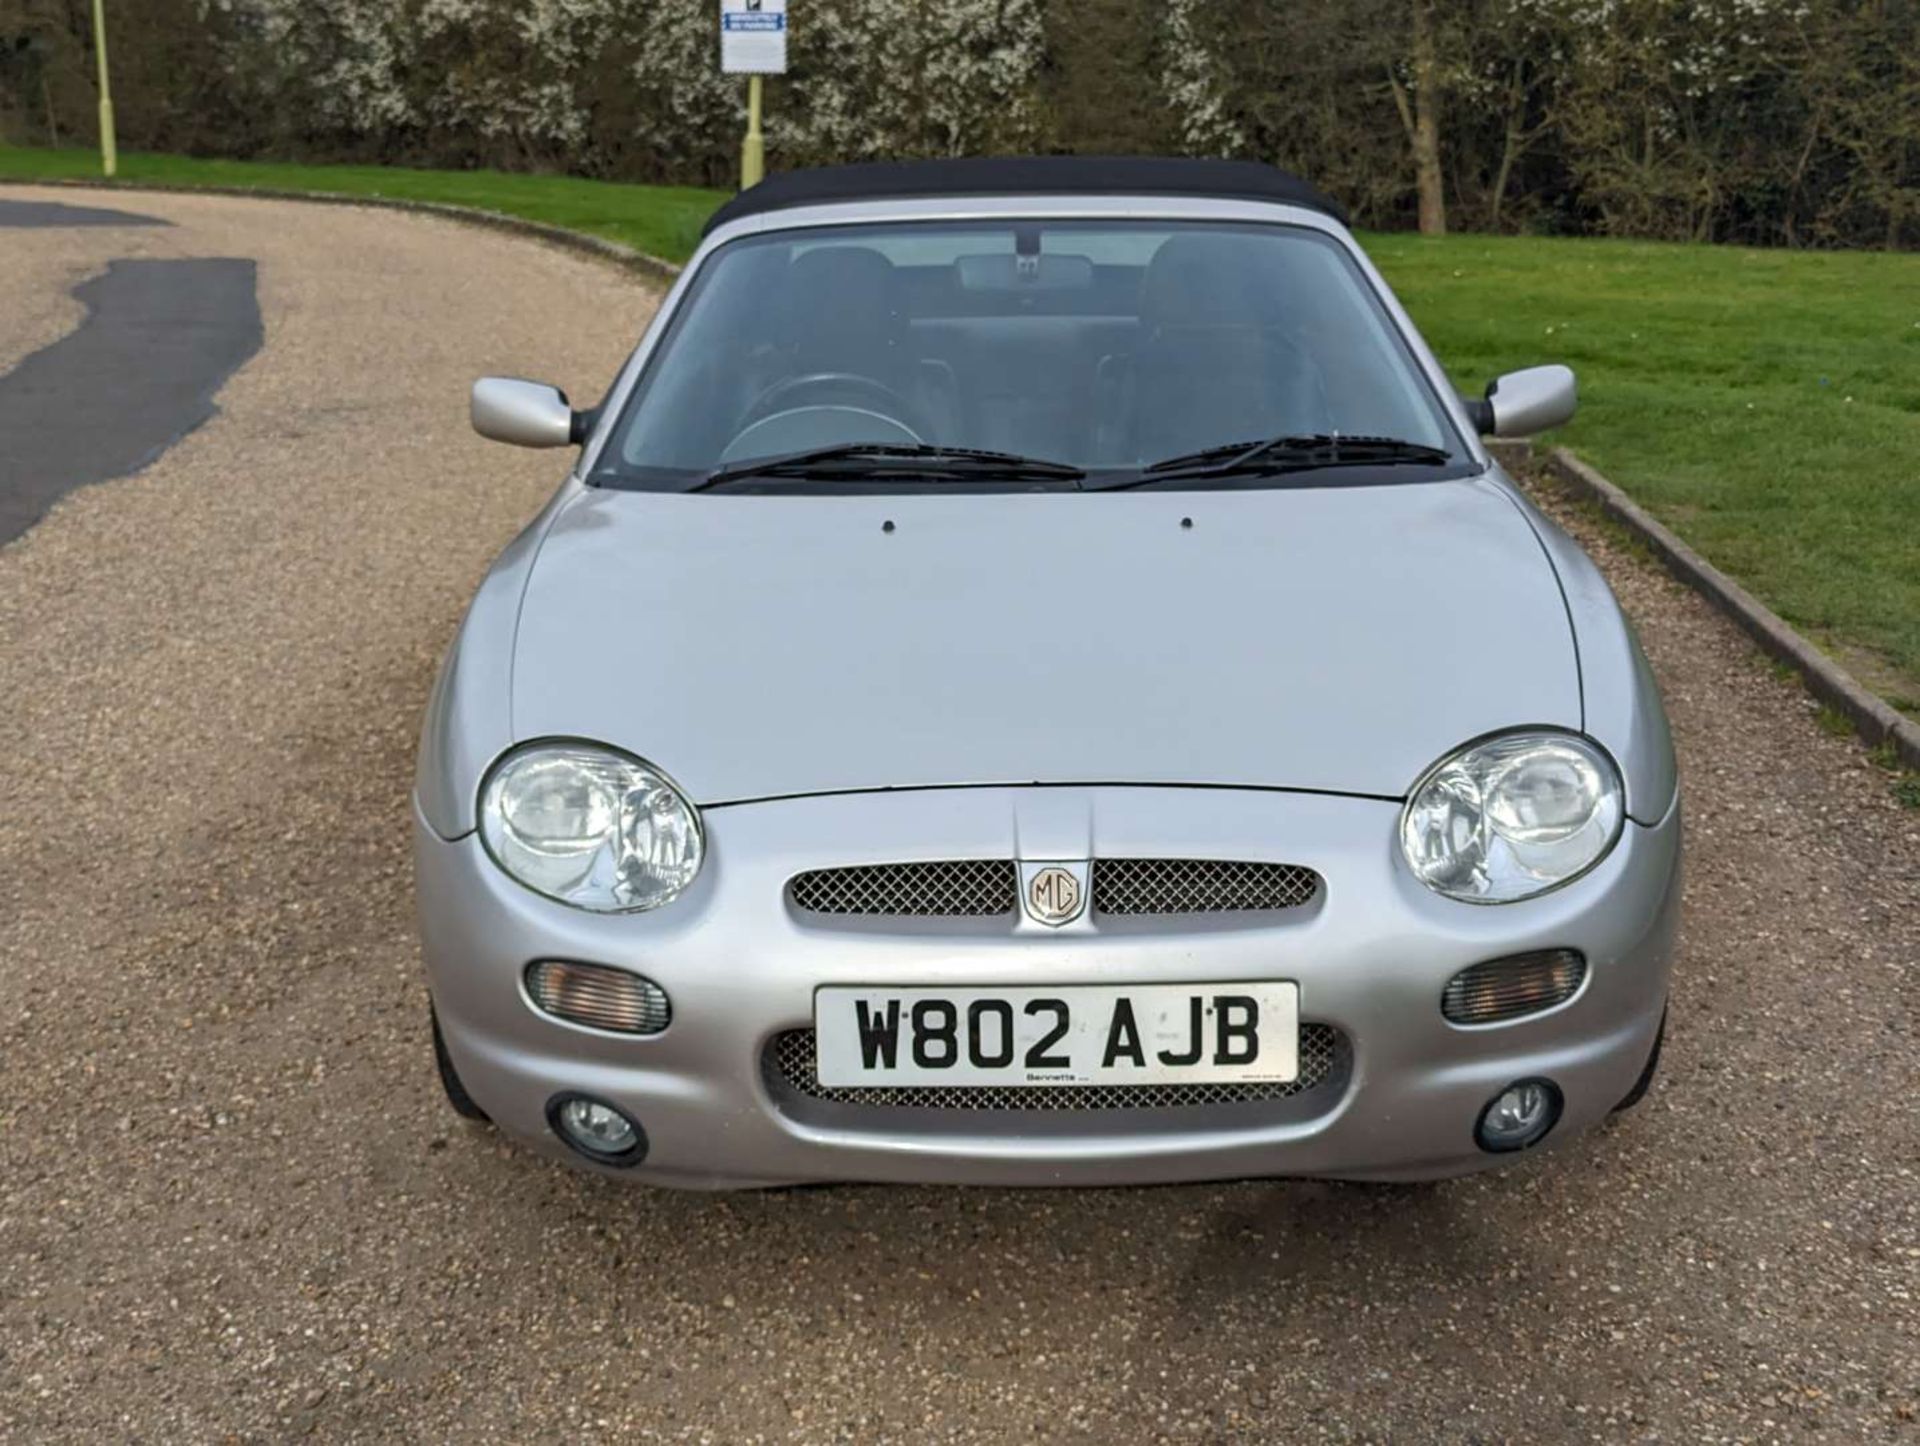 2000 MGF 1.8I VVC - Image 2 of 25